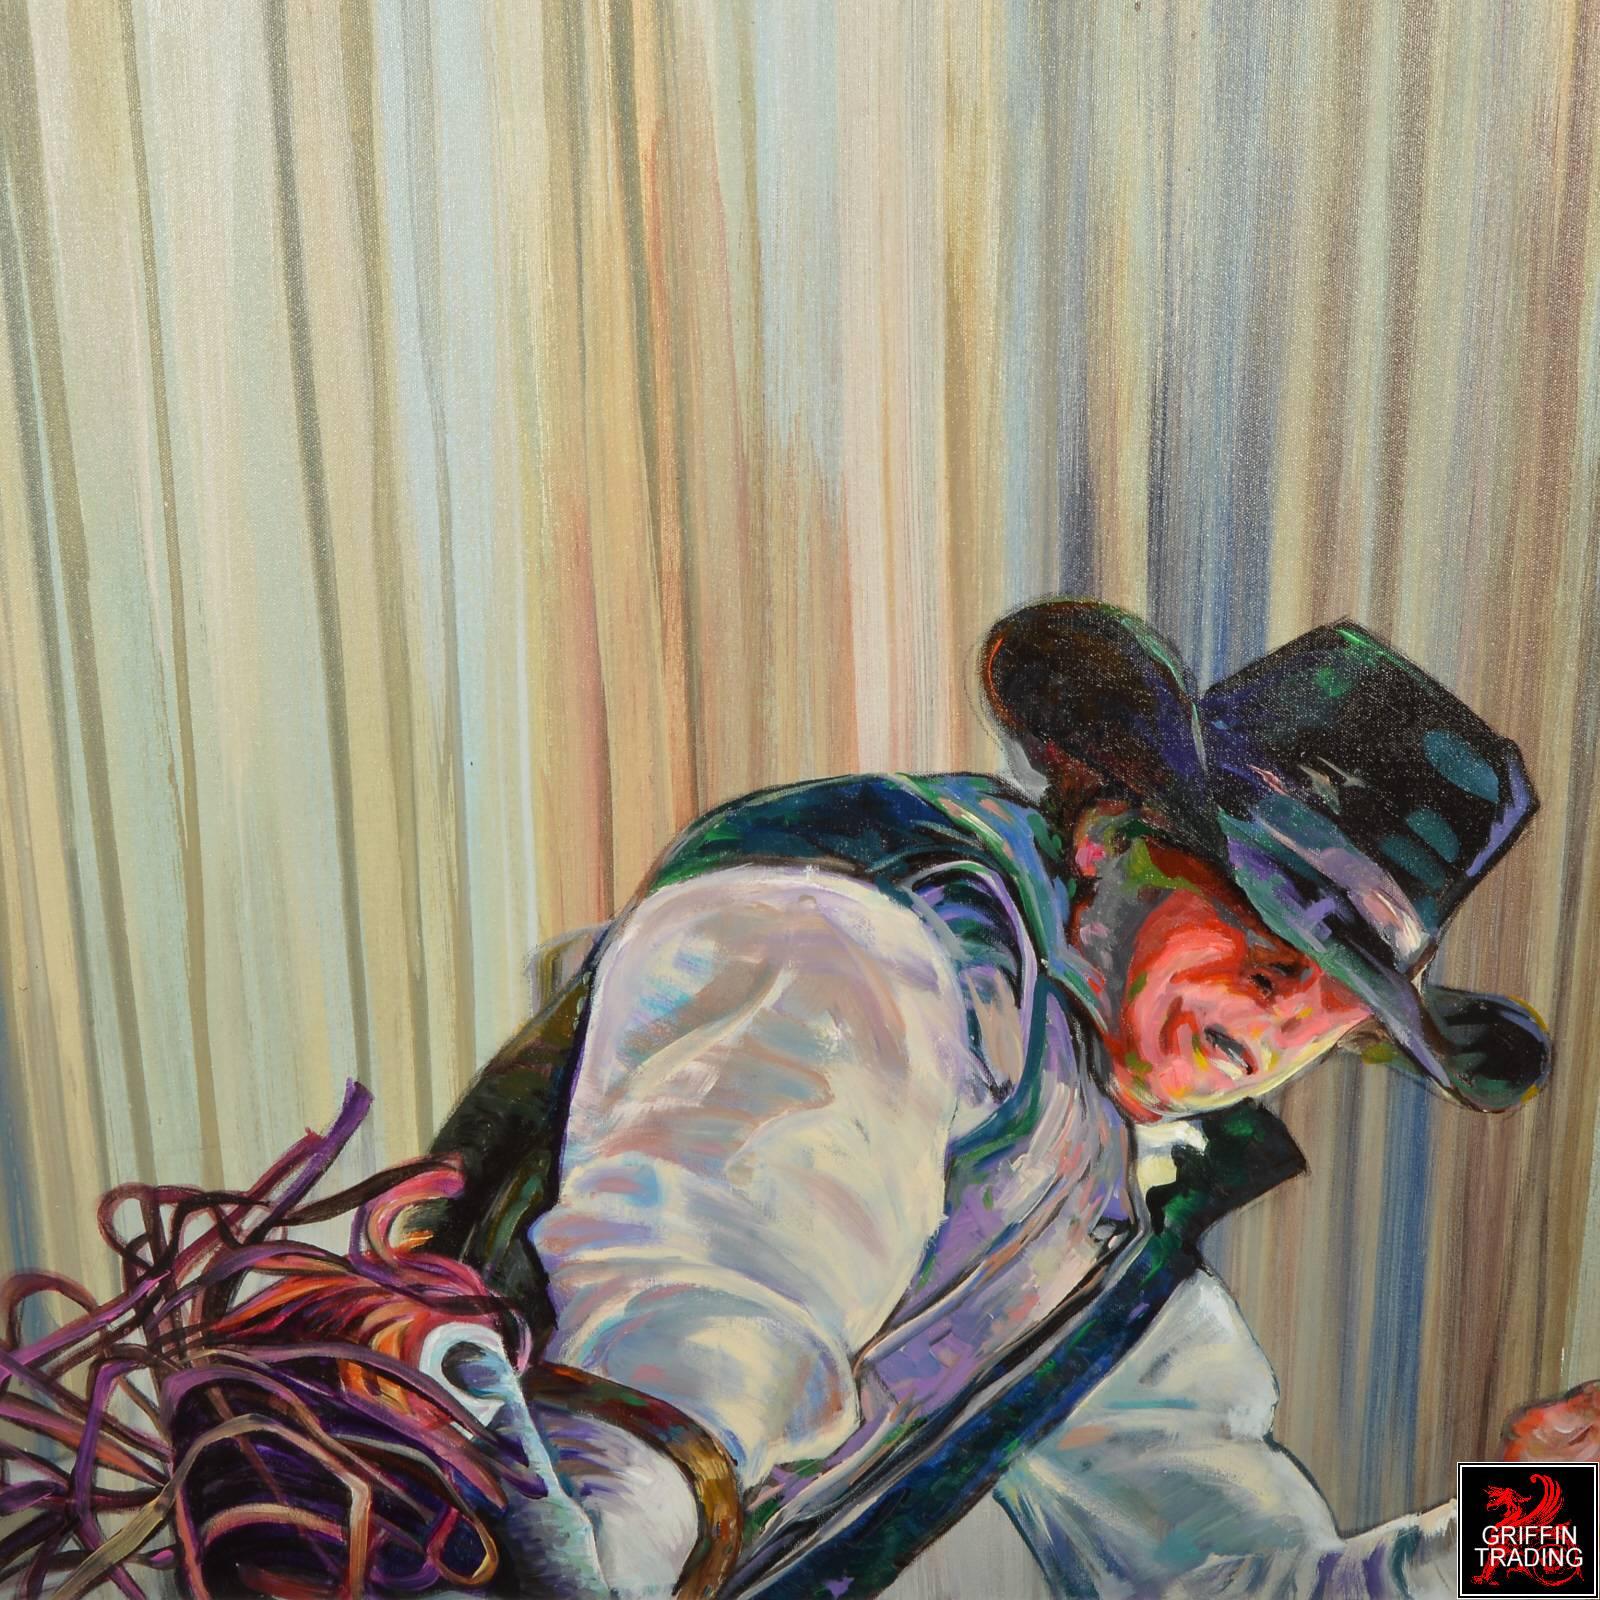 Rustic Flipping Cowboy #2 Rodeo Cowboy on a Bronco Horse Original Painting For Sale